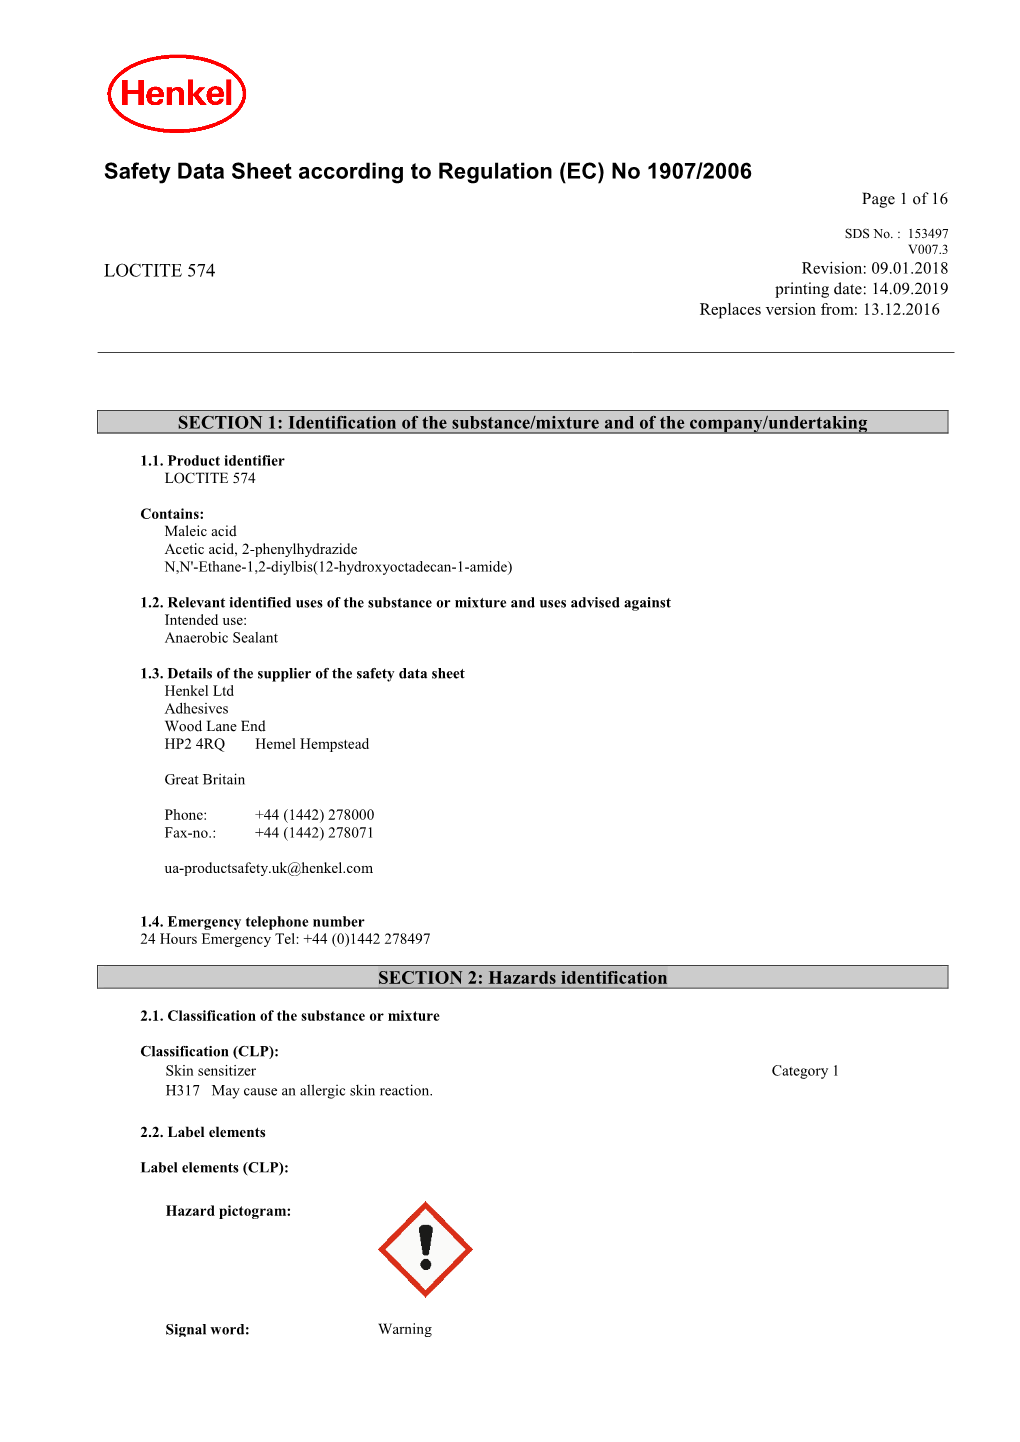 Safety Data Sheet According to Regulation (EC) No 1907/2006 Page 1 of 16